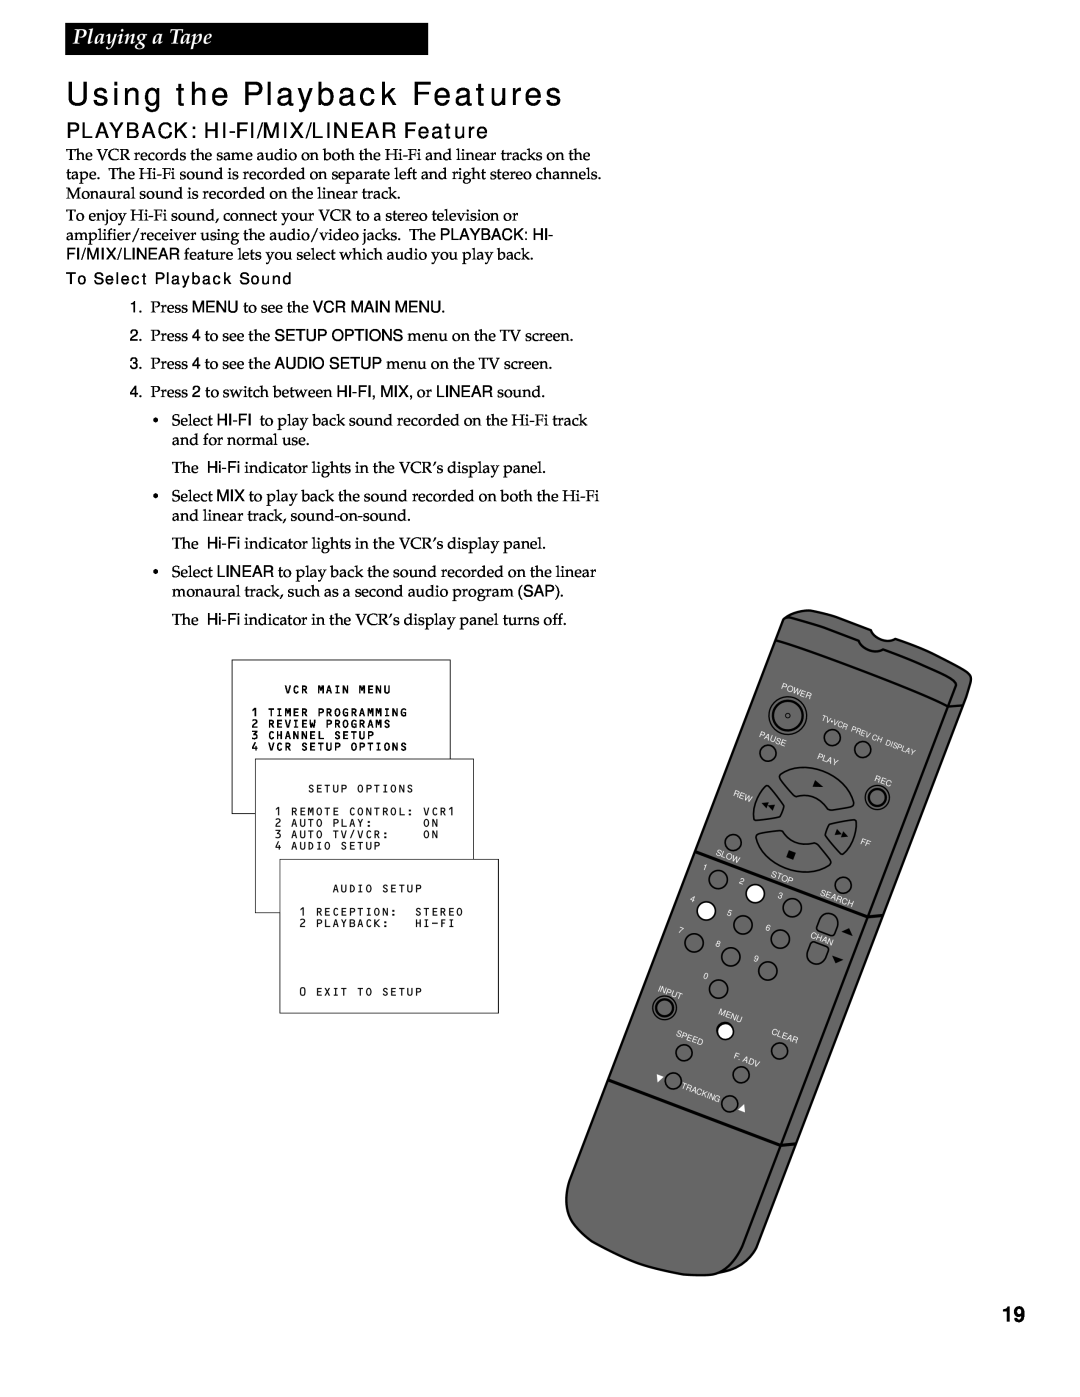 RCA VR602HF manual PLAYBACK HI-FI/MIX/LINEAR Feature, To Select Playback Sound, Using the Playback Features, Playing a Tape 